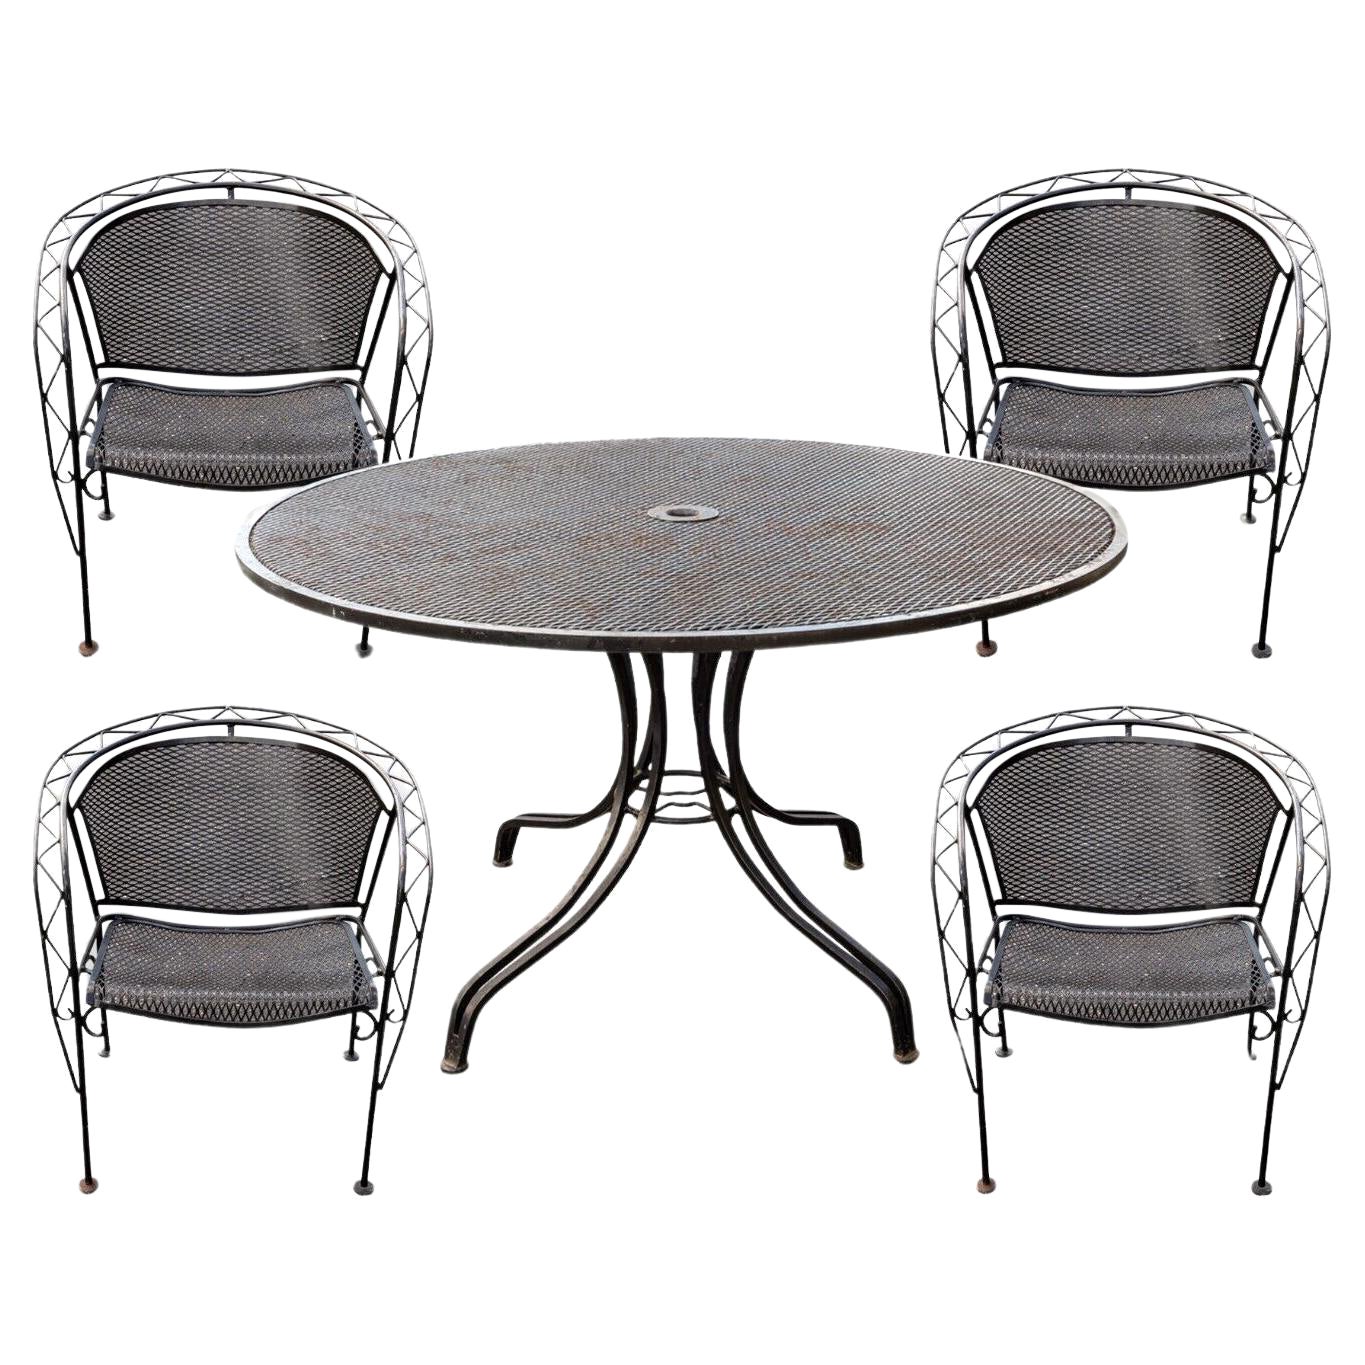 Vintage Russell Woodard Black Wrought Iron Patio Set with Table and 4 Chairs For Sale